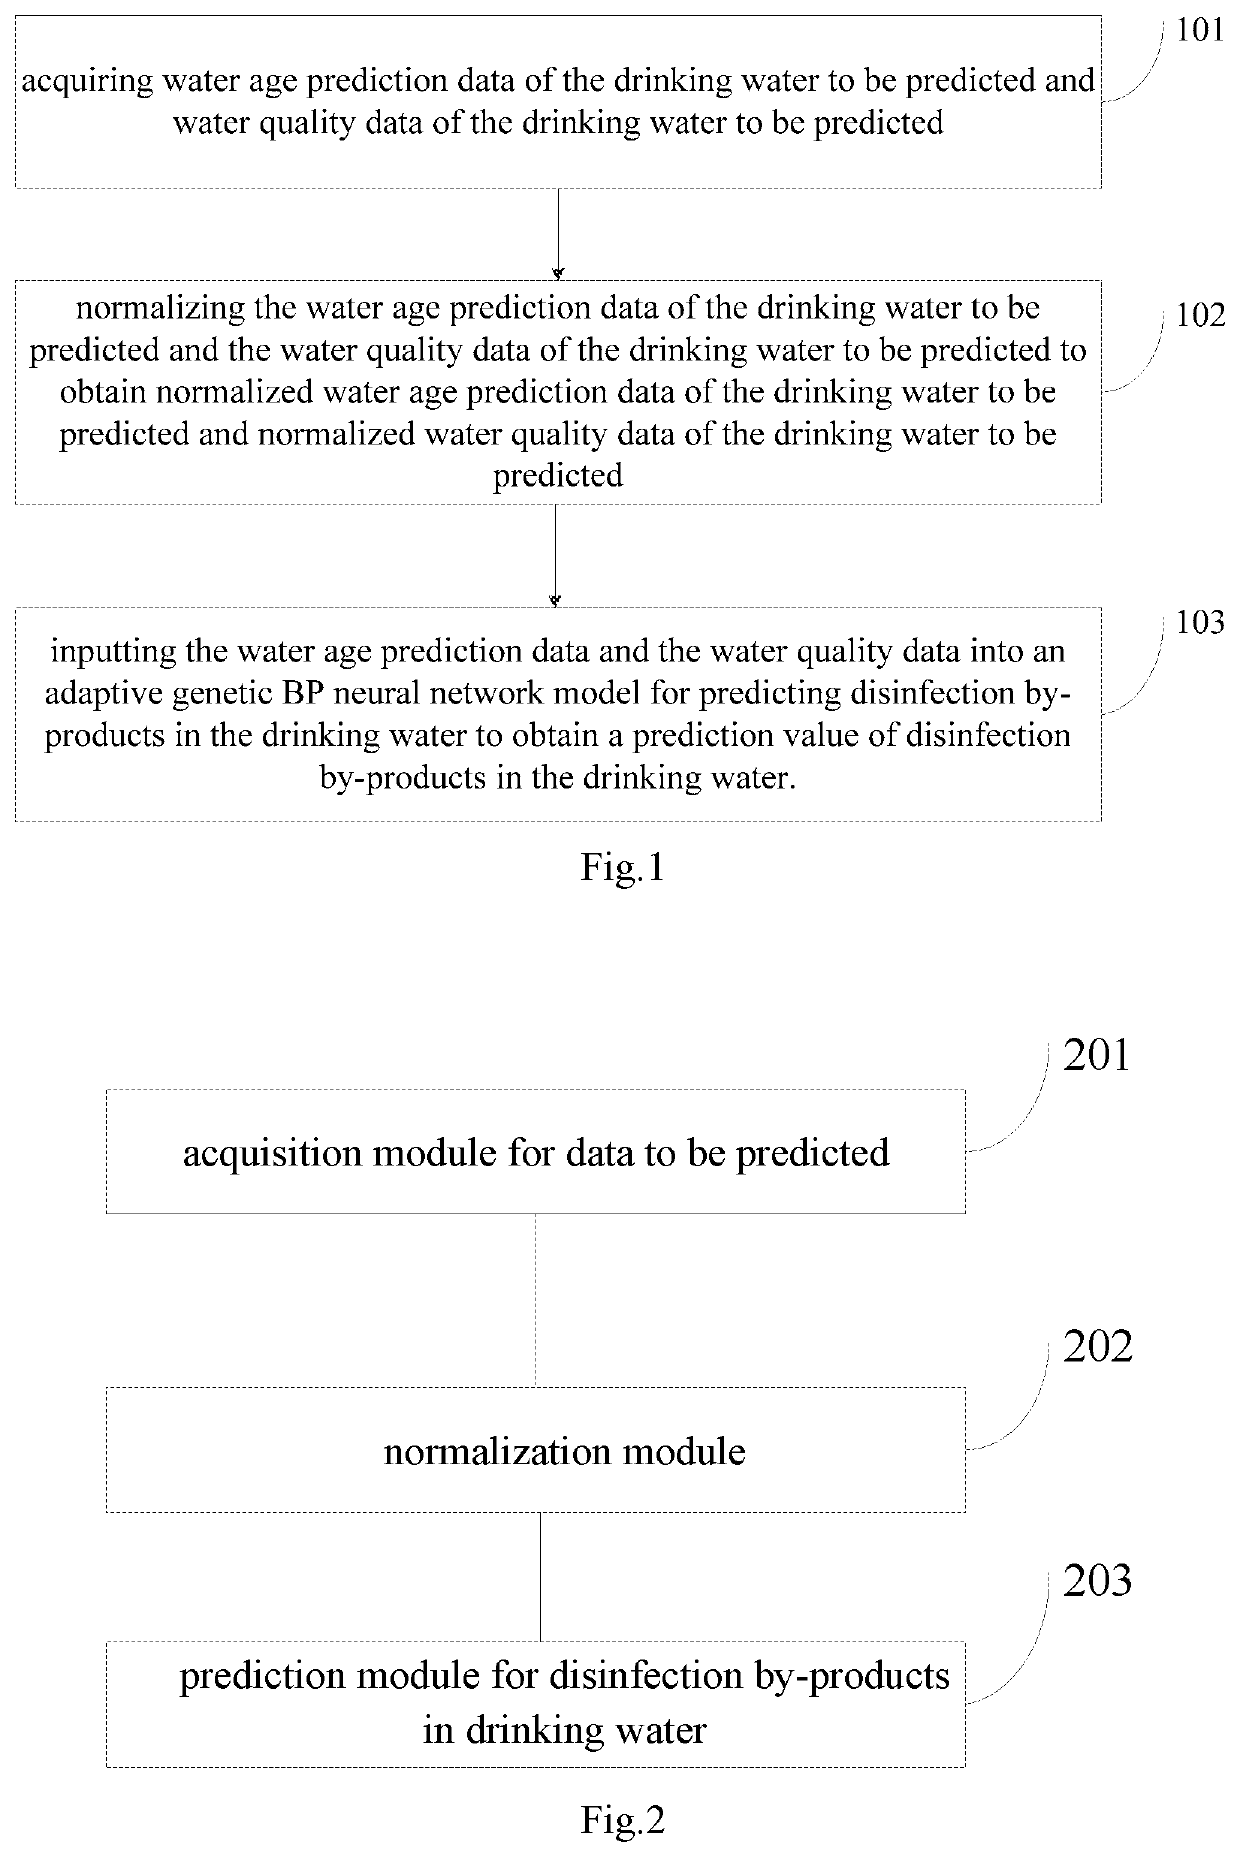 Method and system for predicting disinfection by-products in drinking water